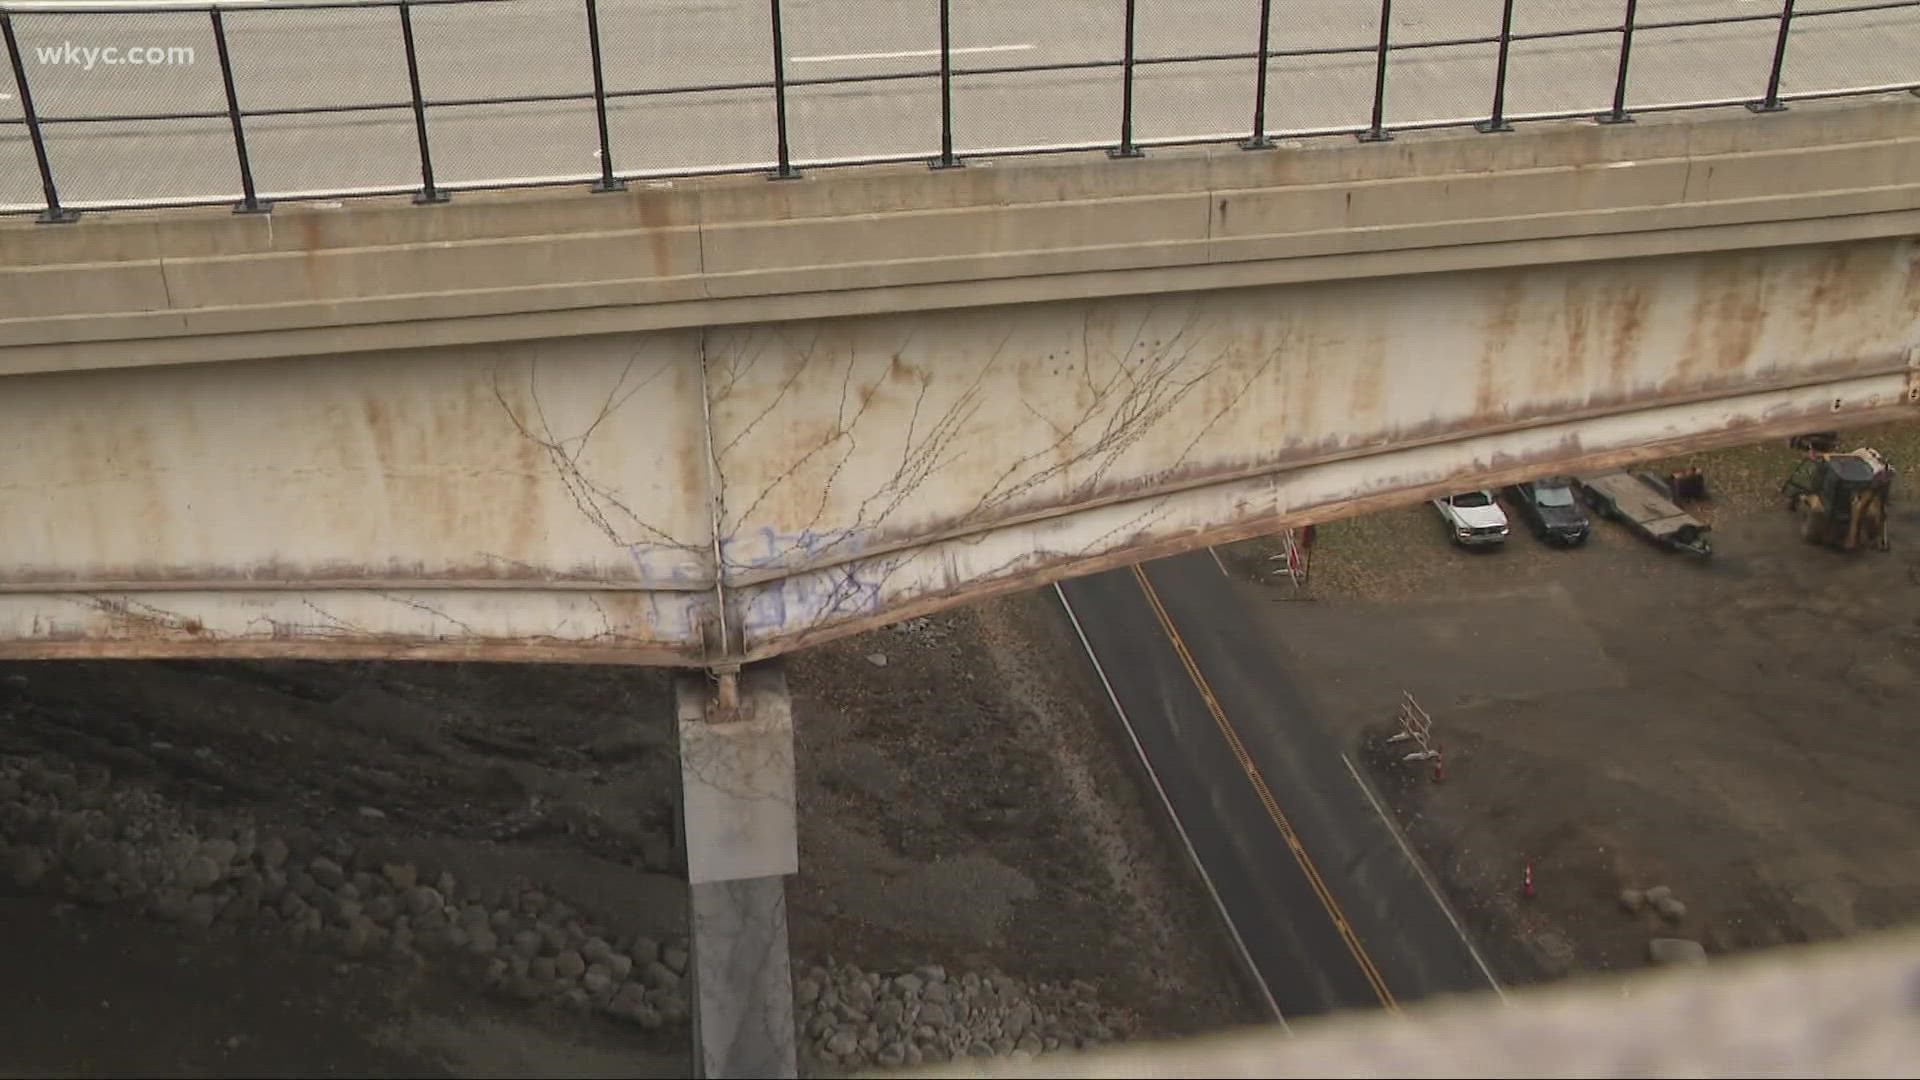 After the approval of the Build Back Better act, money is coming to Cuyahoga County. Sara Shookman explains how that money could be used to aid bridges in need.